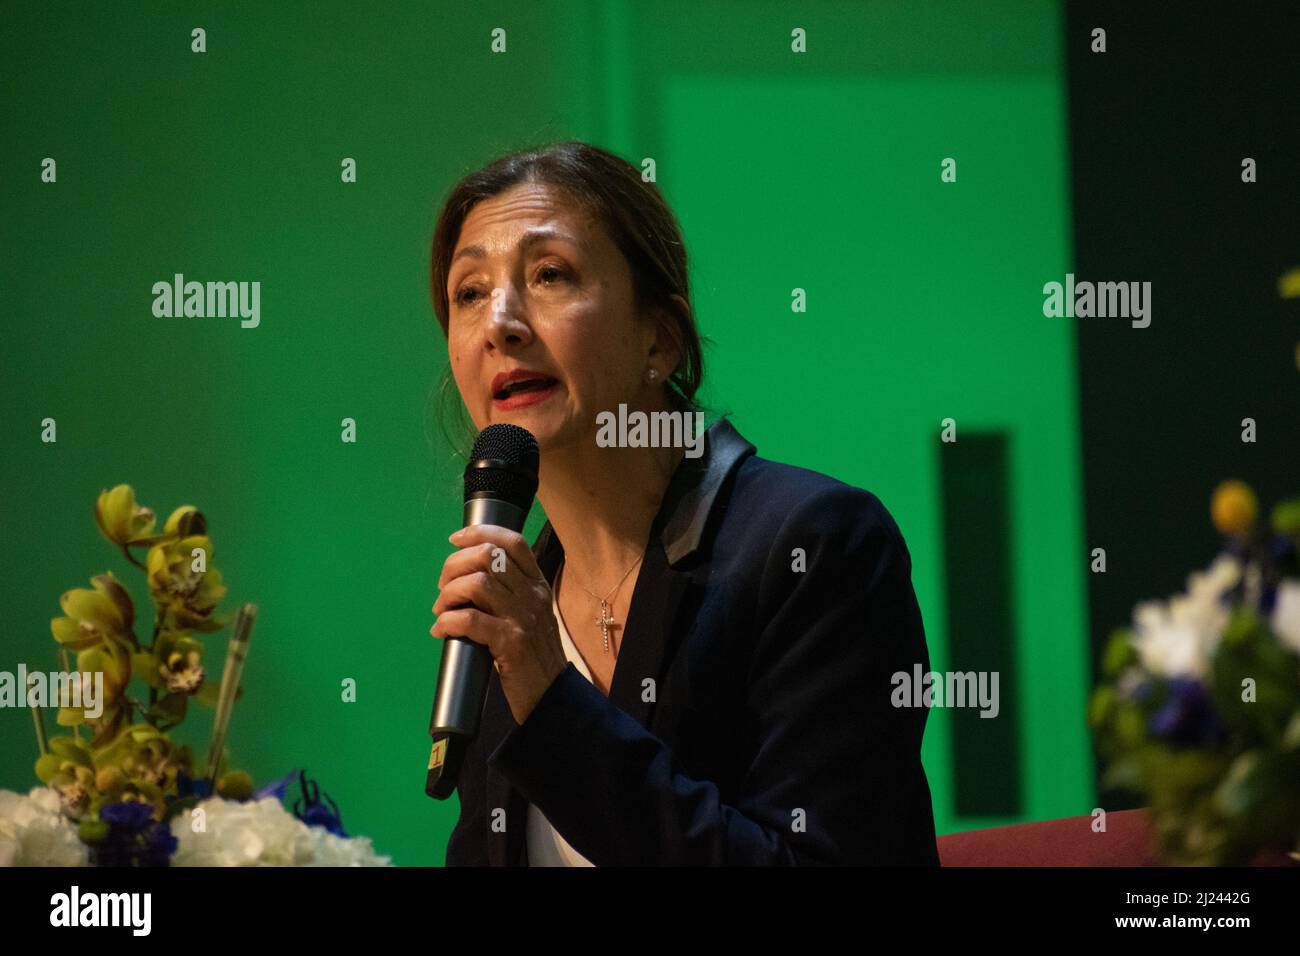 Bogota, Colombia, March 29, 2022. Presidential candidate Ingrid Betancourt for the political party 'Partido Verde Oxigeno' speaks during the 'Universidad del Externado' Presidential debate amid the 2022 Presidential elections run on May 29, in Bogota, Colombia, March 29, 2022. Stock Photo